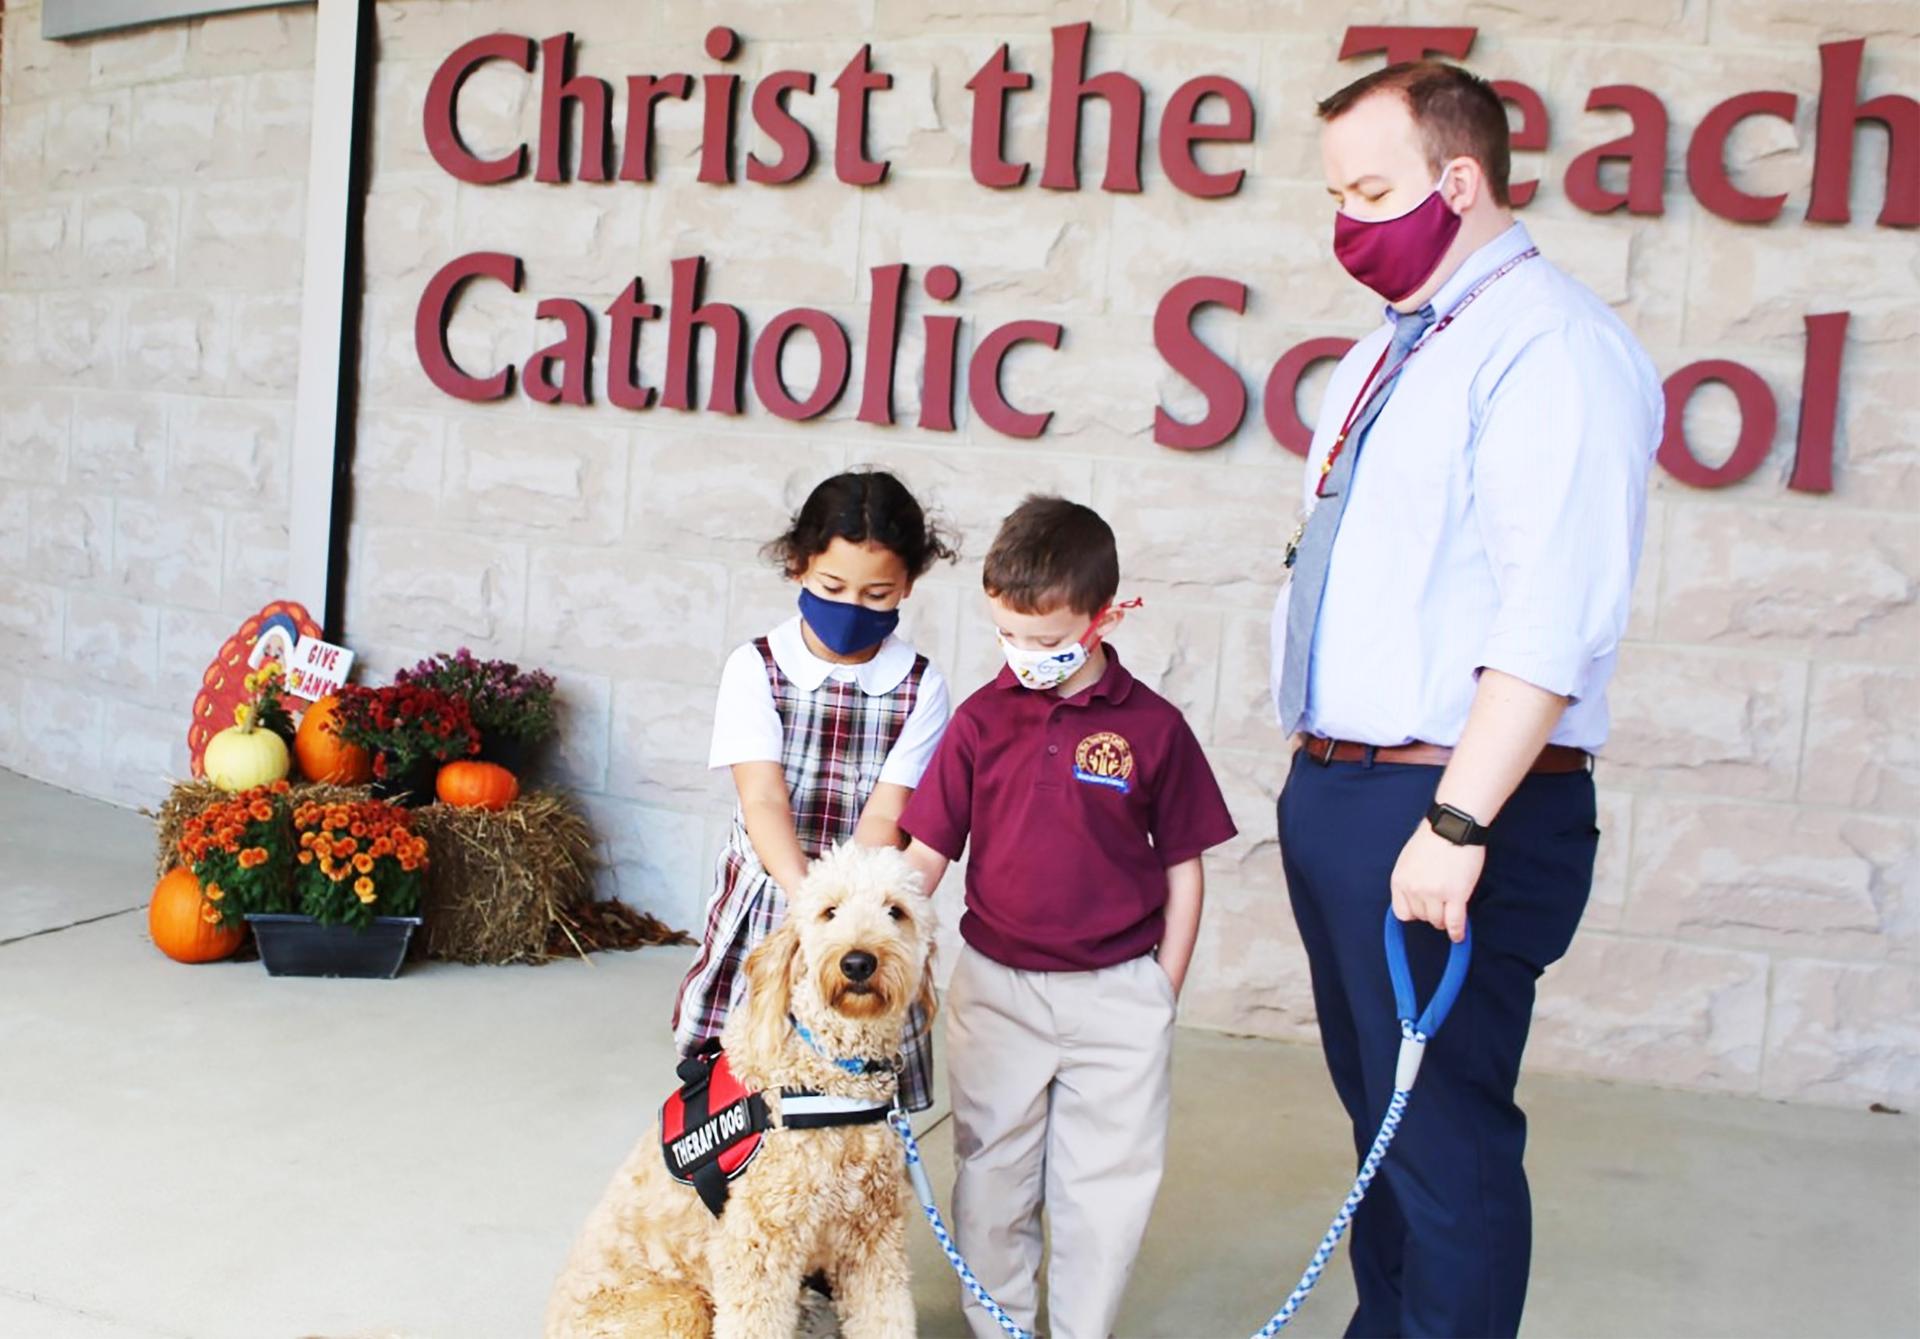 Therapy dog becomes essential worker at Catholic school during pandemic